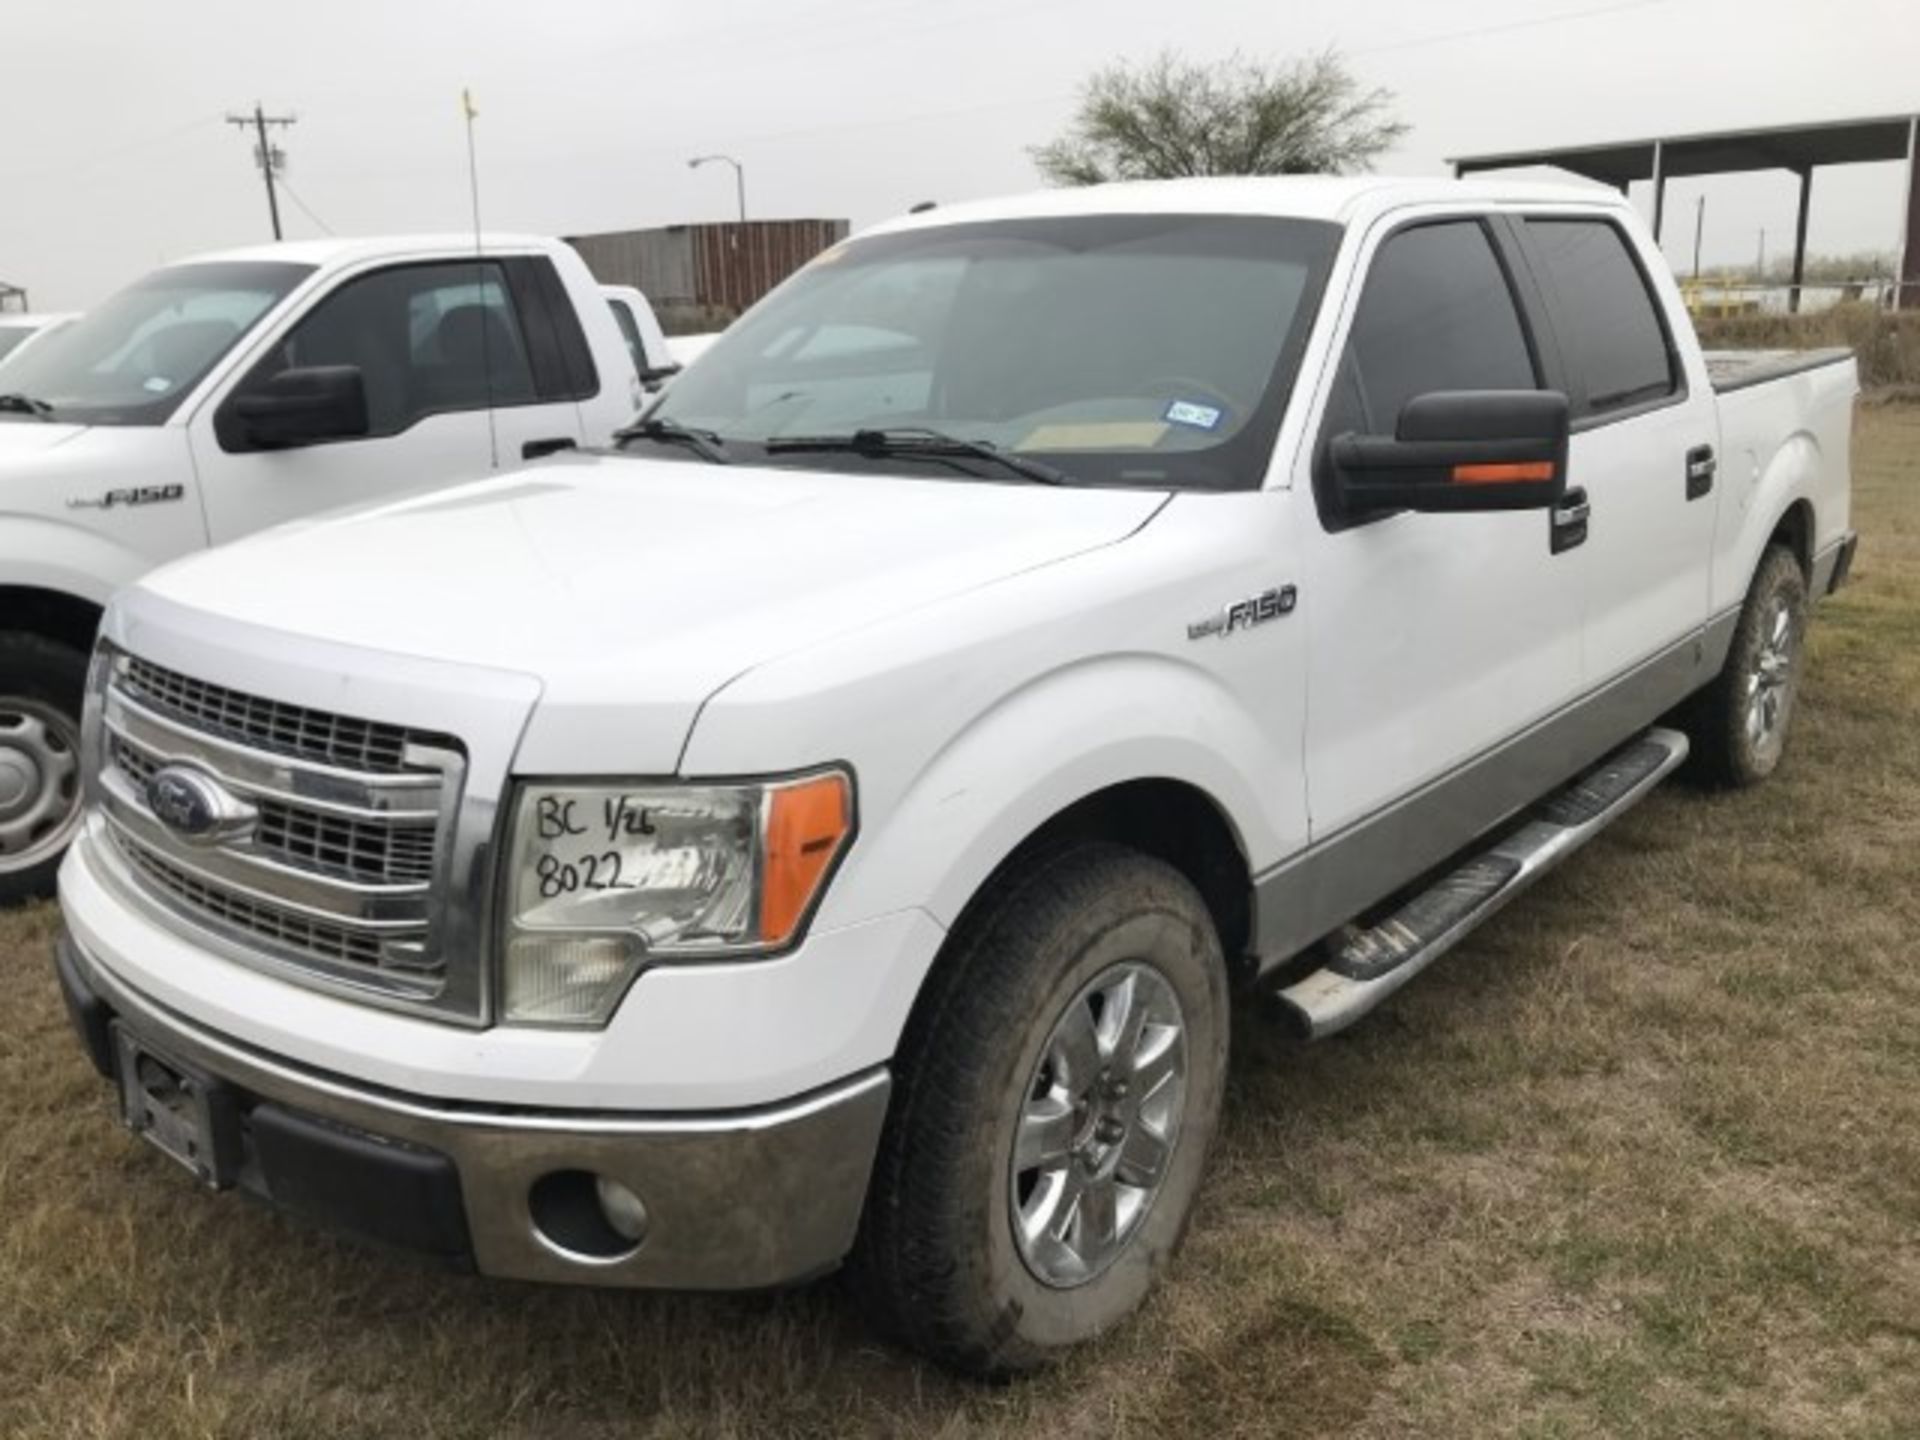 2013 Ford F-150 XLT VIN: 1FTFW1CF9DFC71284 Odometer States: 122,041 Color: